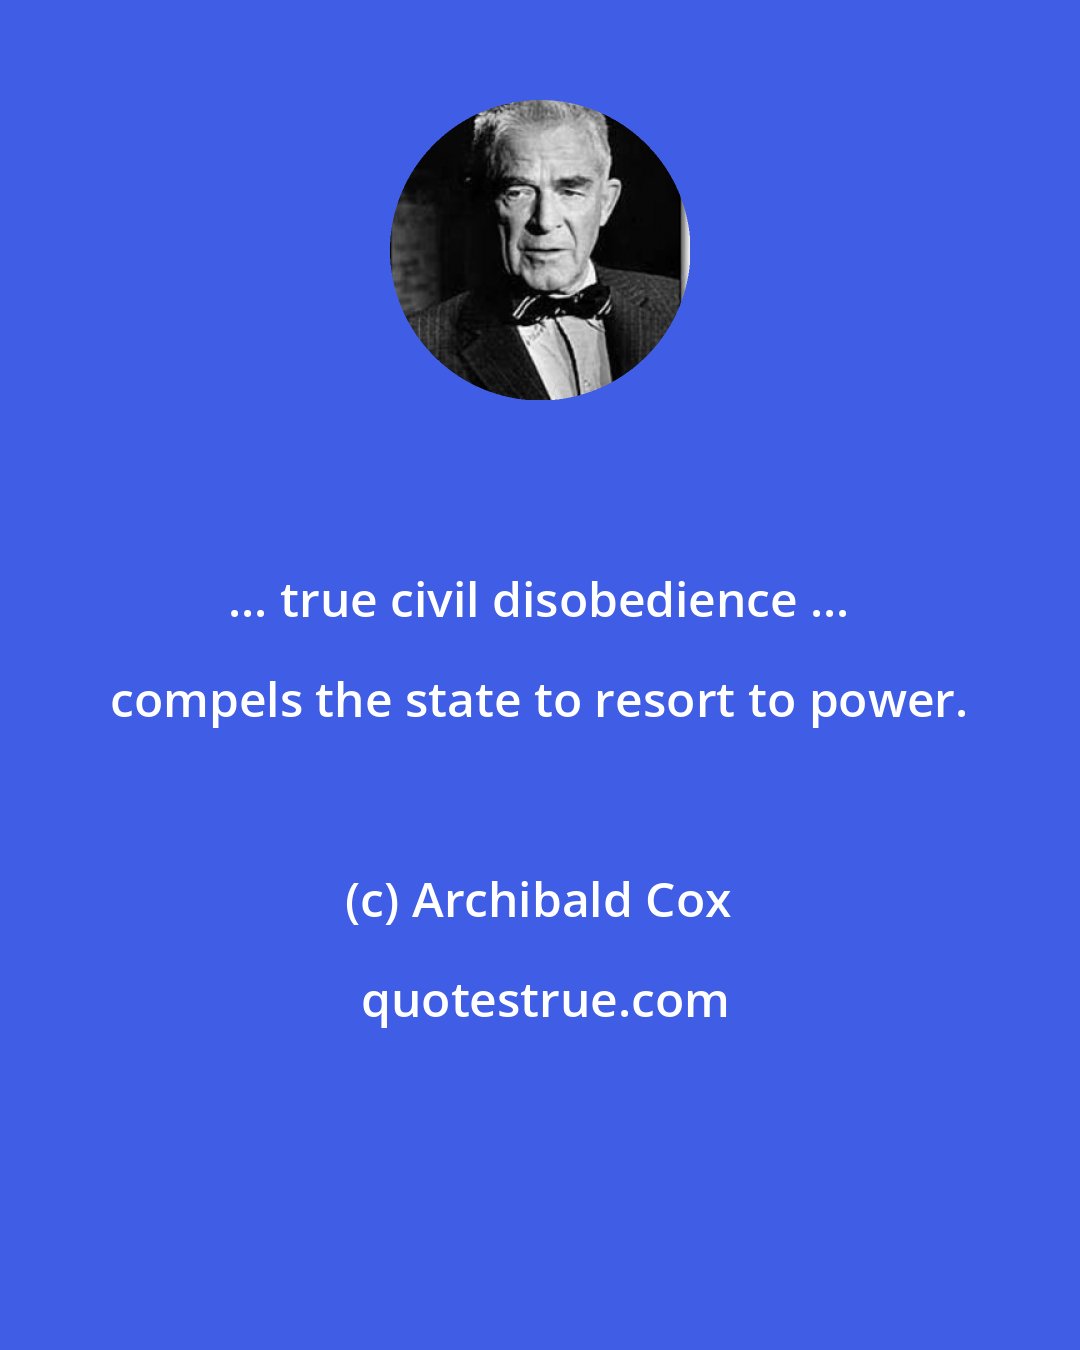 Archibald Cox: ... true civil disobedience ... compels the state to resort to power.